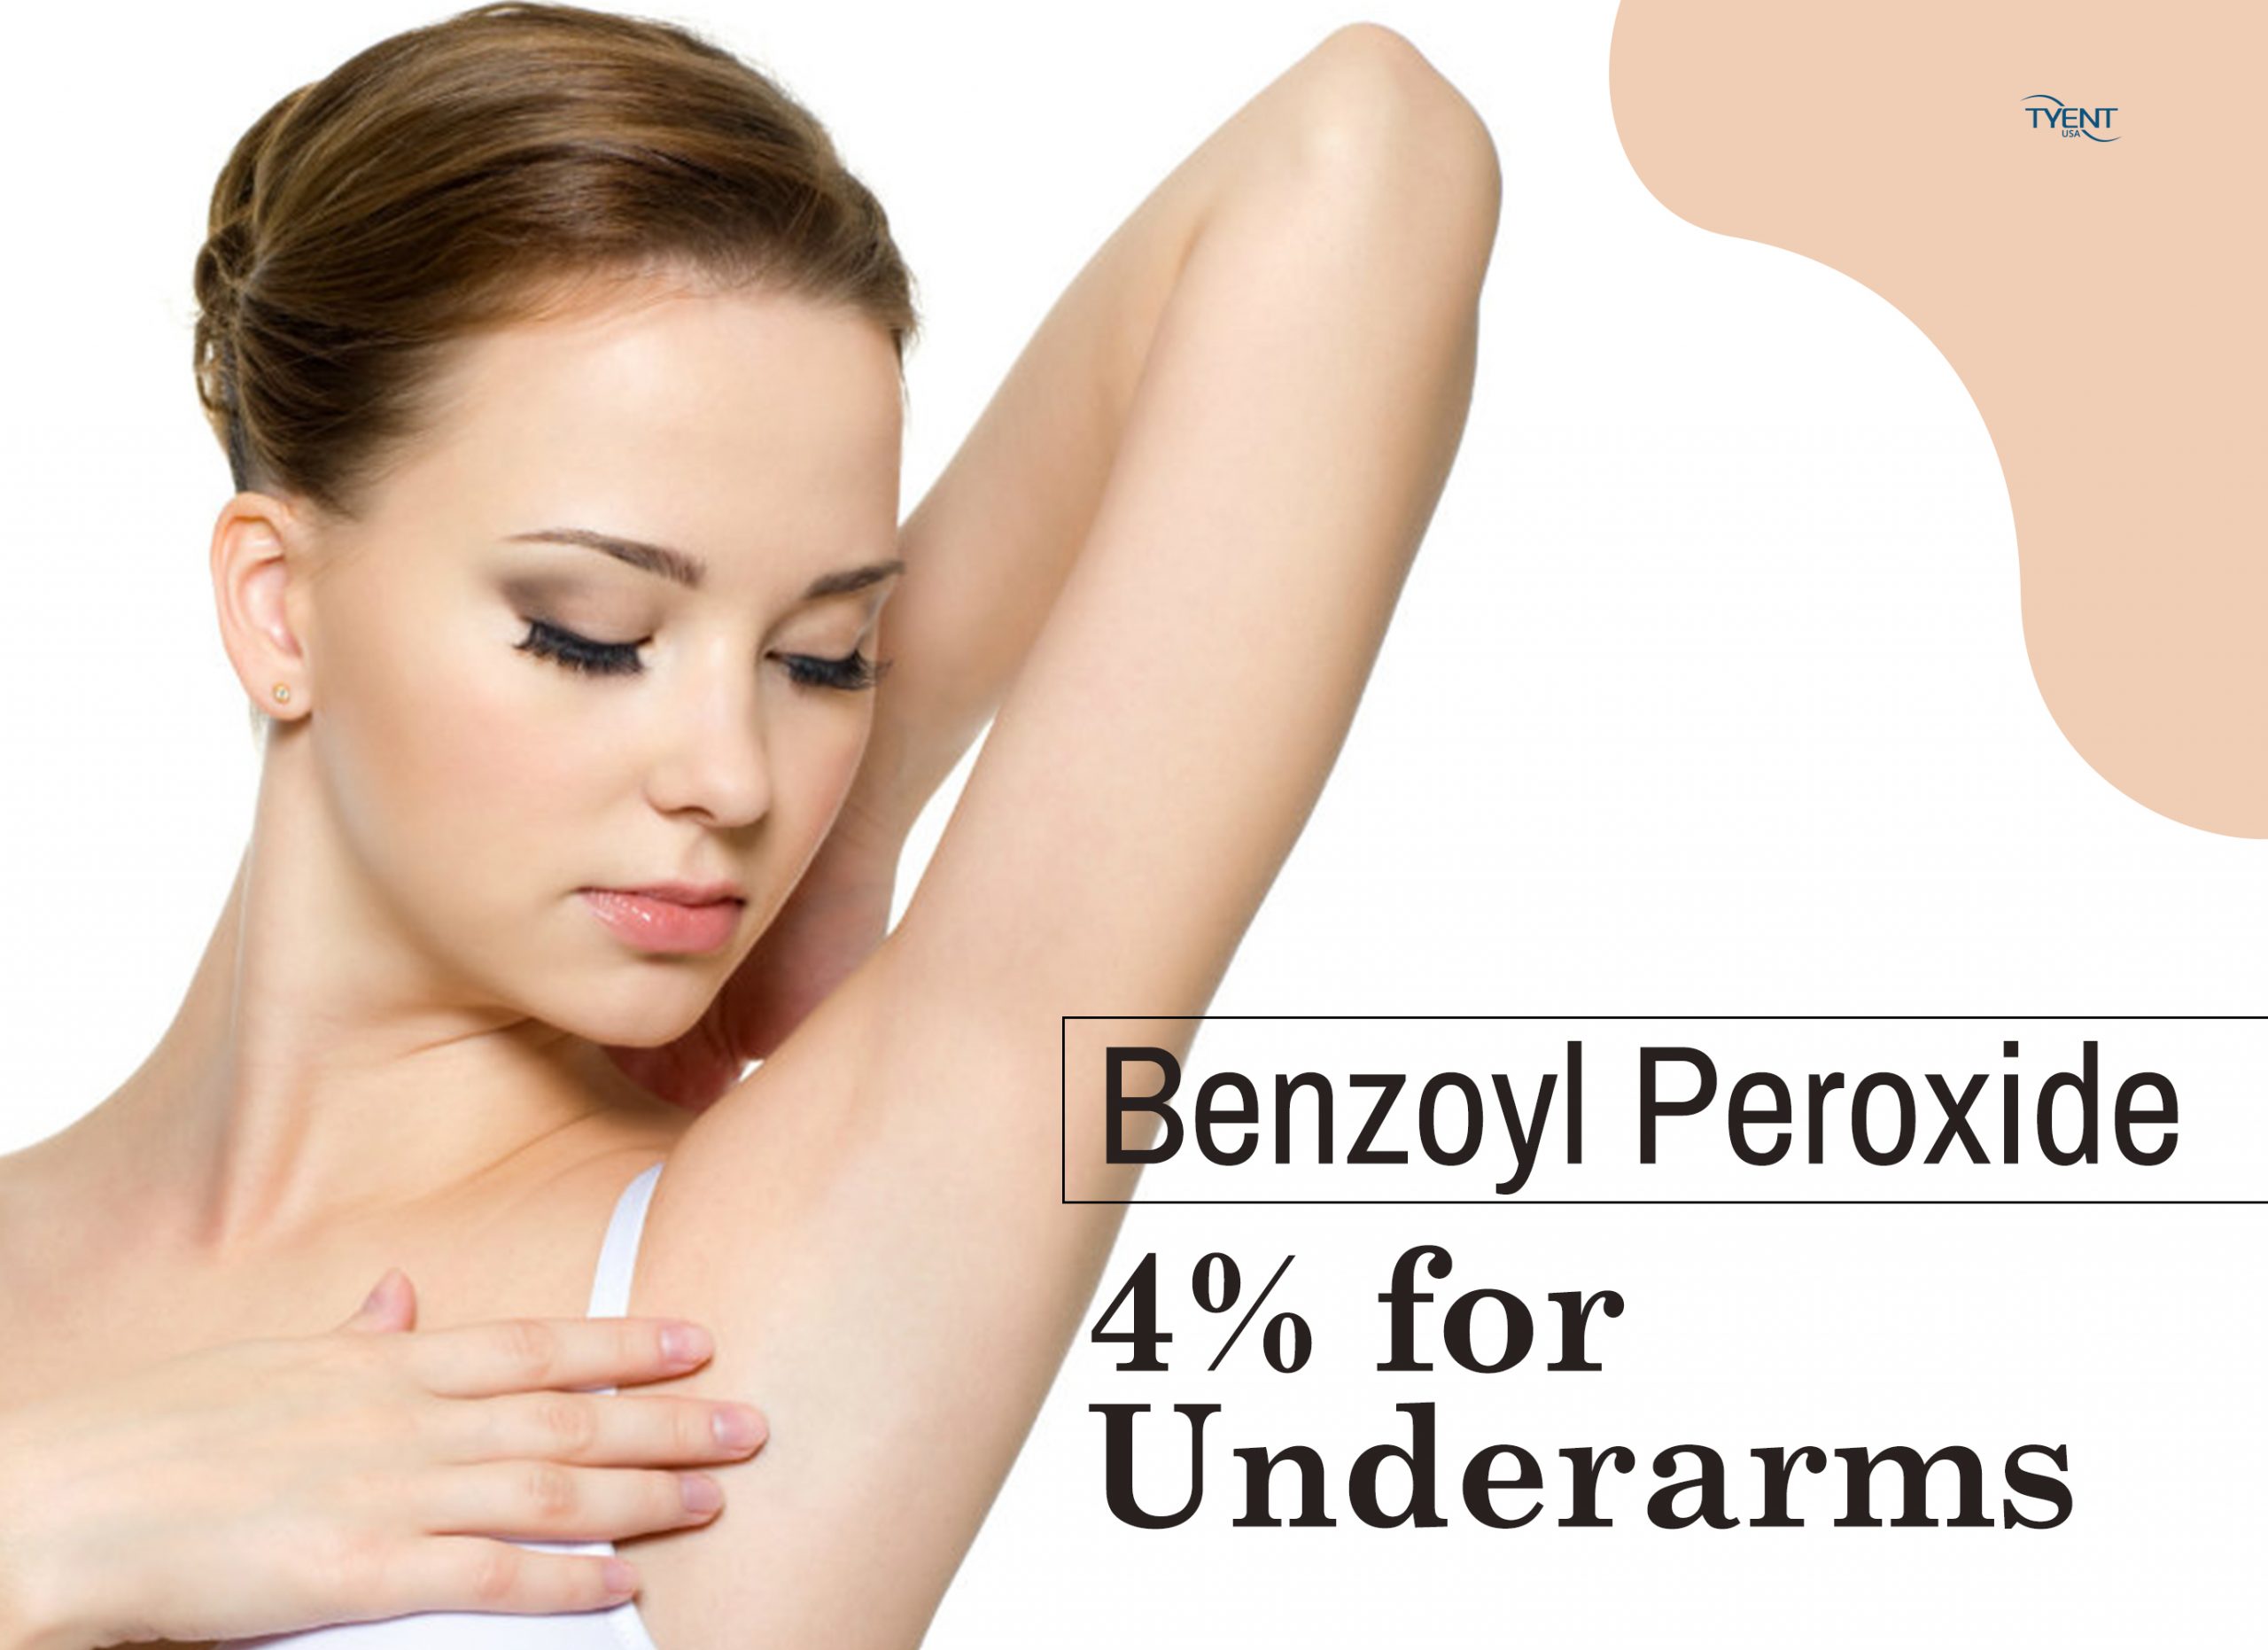 Benzoyl peroxide for underarms